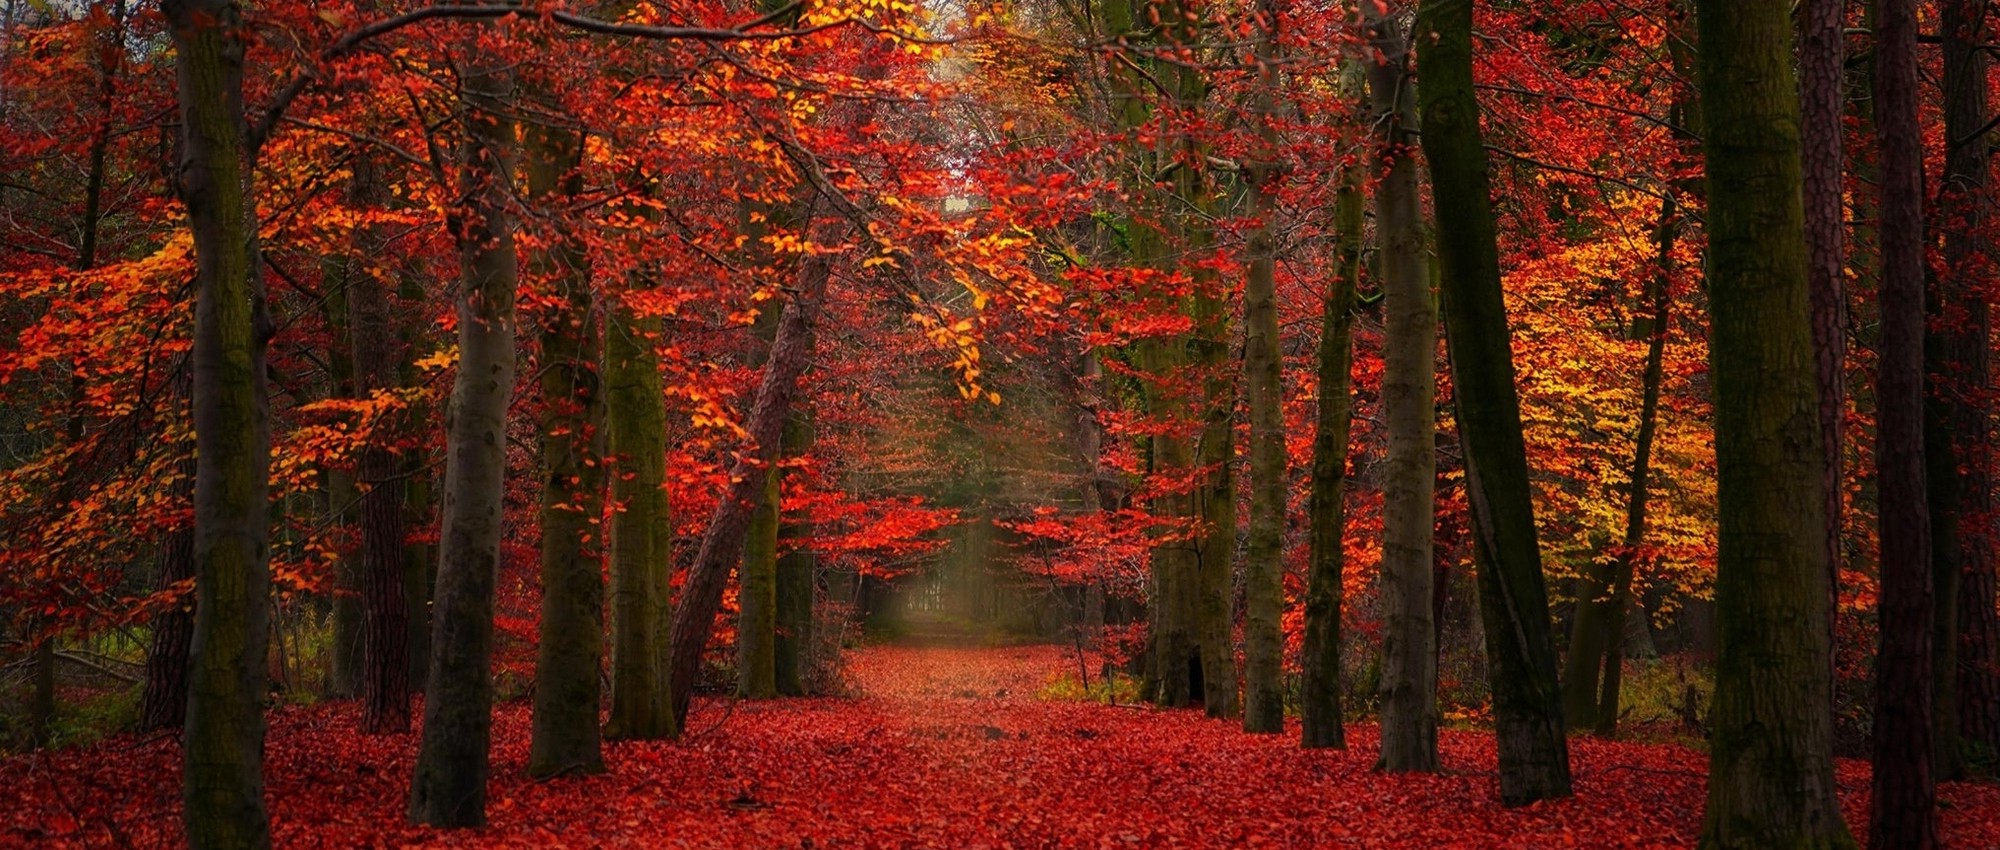 nature, Landscape, Fall, Red, Yellow, Leaves, Path, Trees, Fairy Tale, Forest Wallpaper